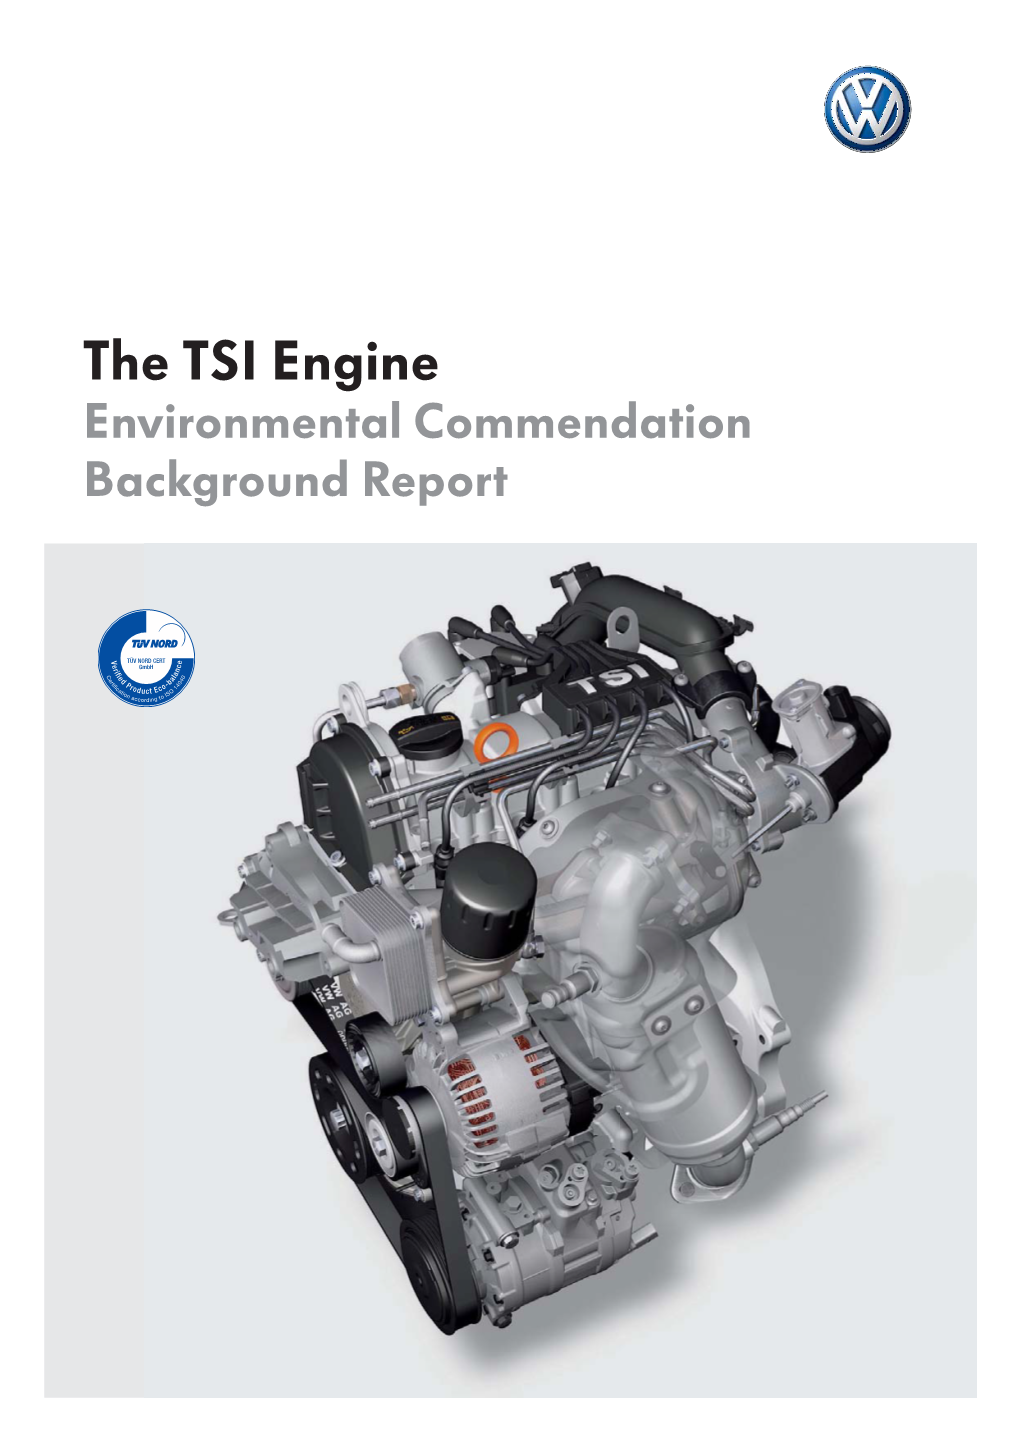 The TSI Engine Environmental Commendation Background Report Contents